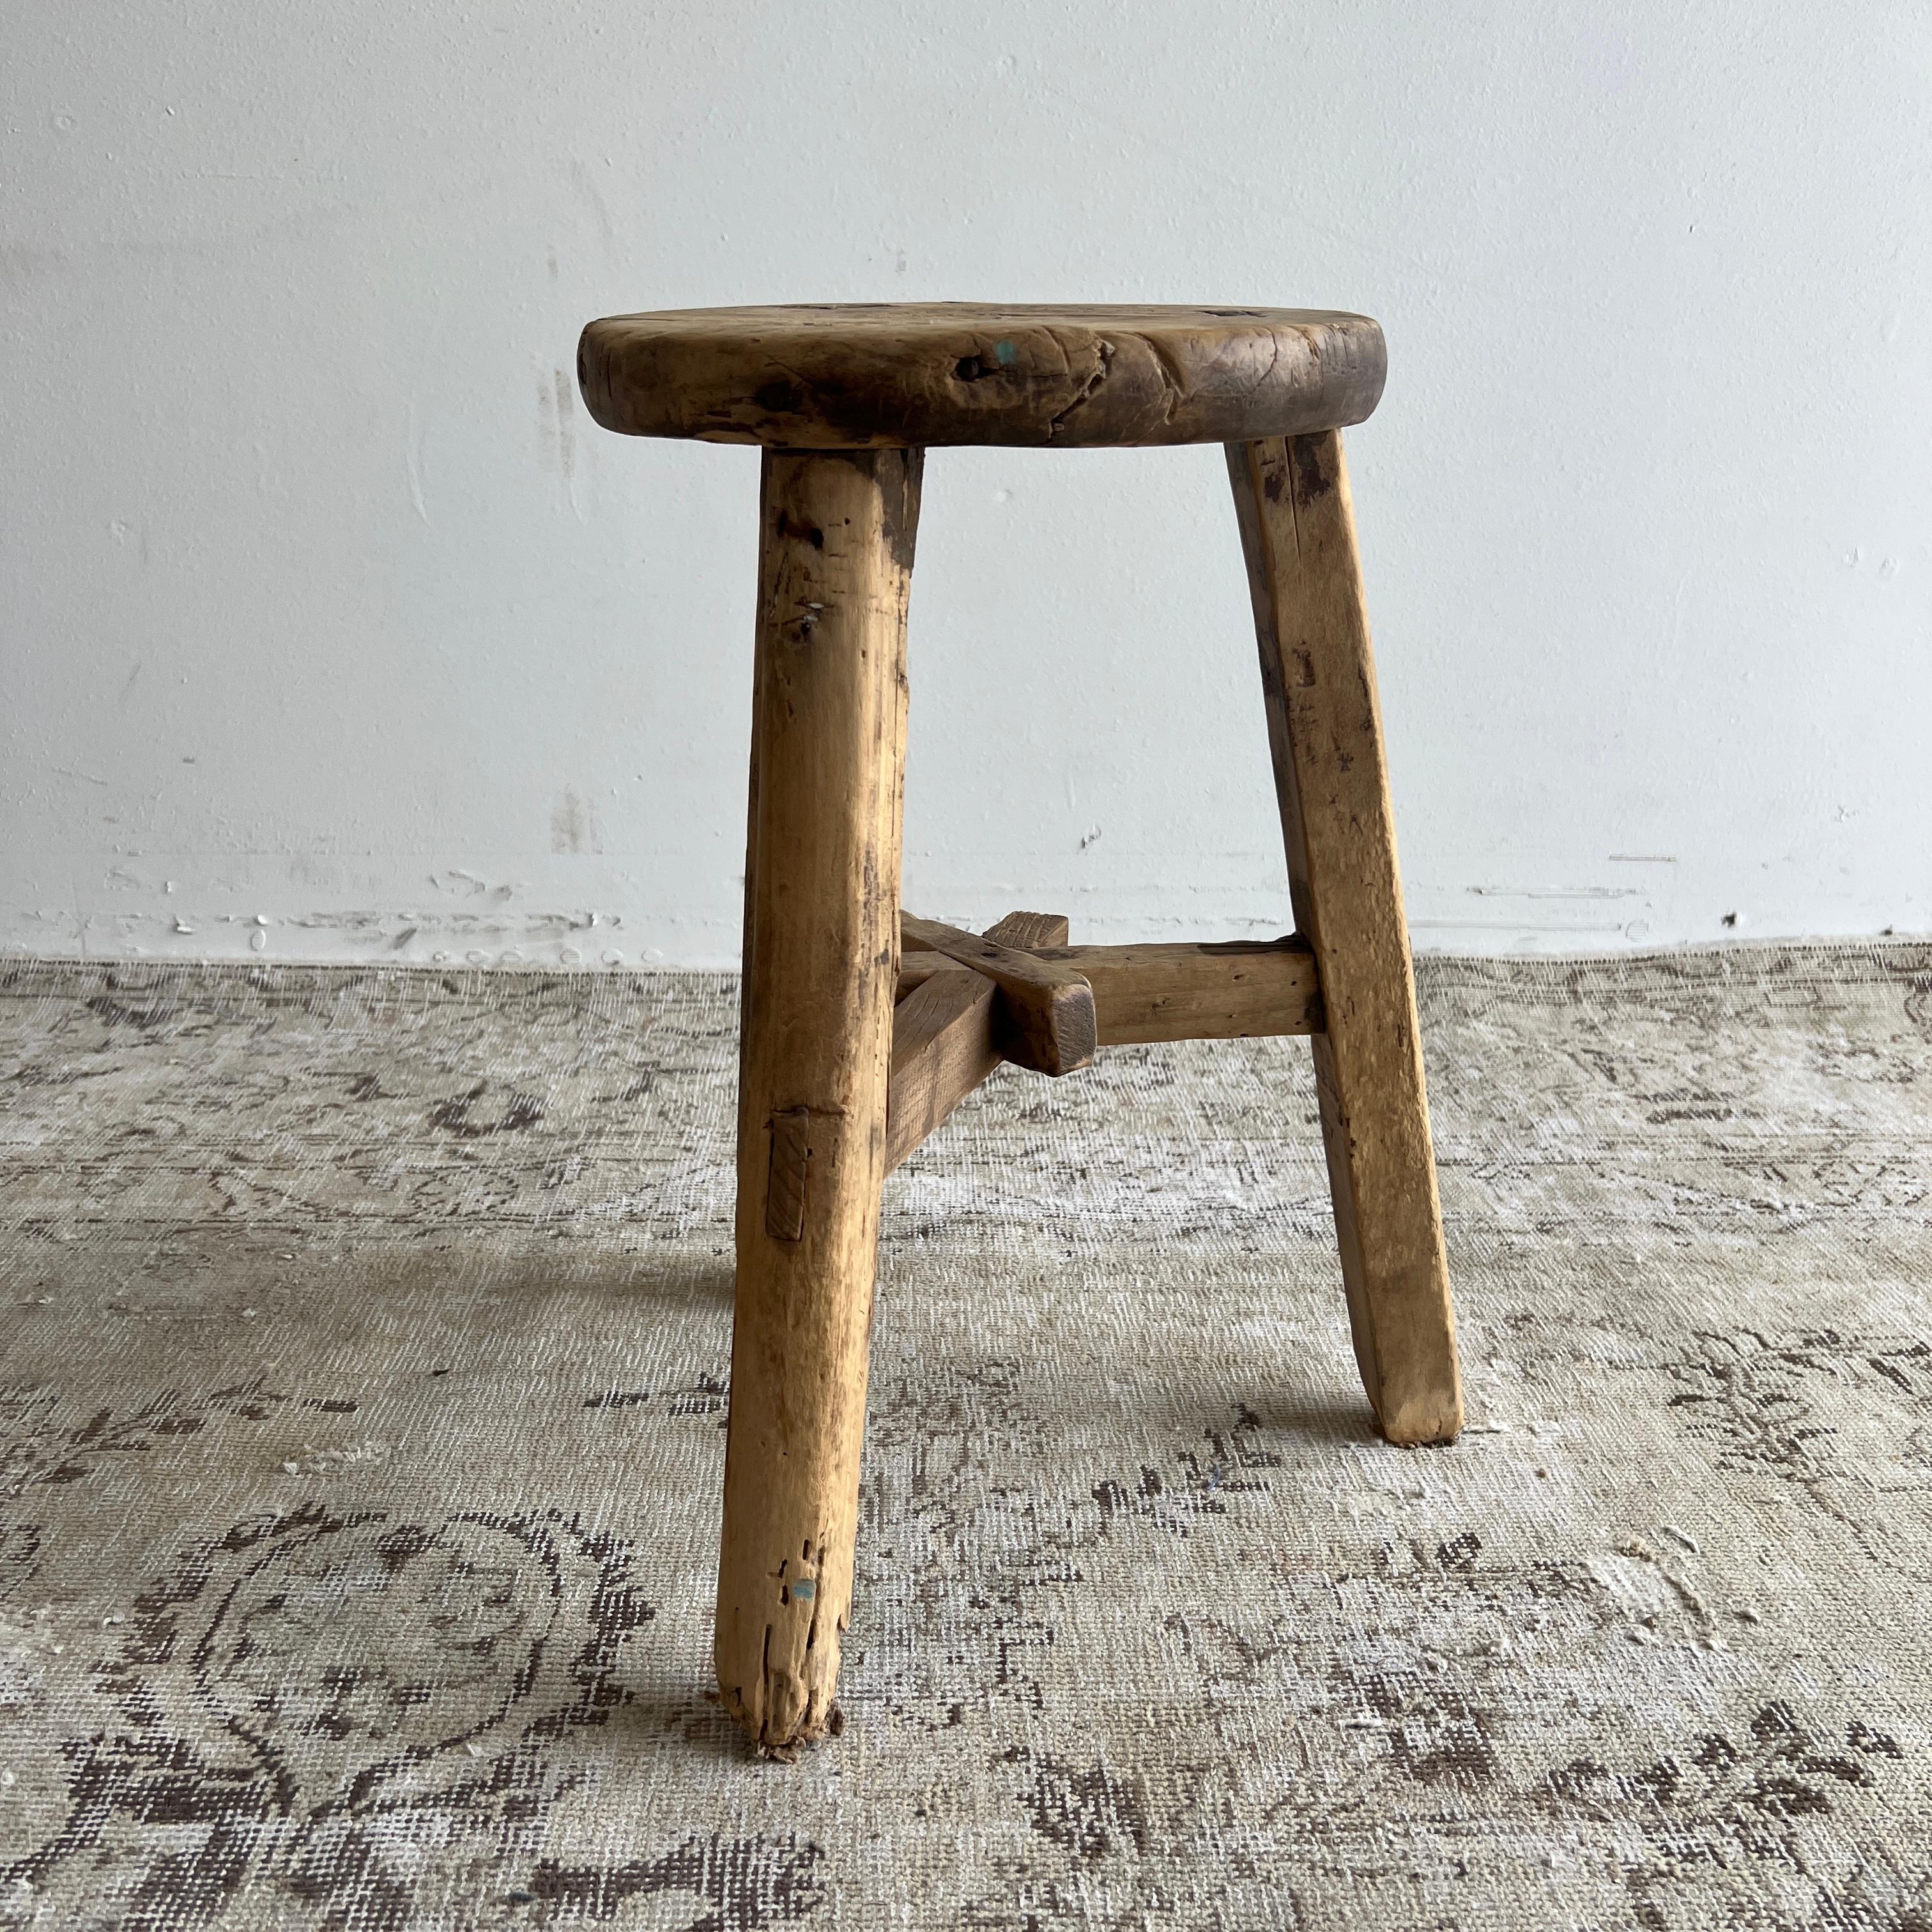 Vintage antique elmwood stool.
These are the real vintage antique elmwood stools! Beautiful antique patina, with weathering and age, these are solid and sturdy ready for daily use, use as a table, stool, drink table, they are great for any